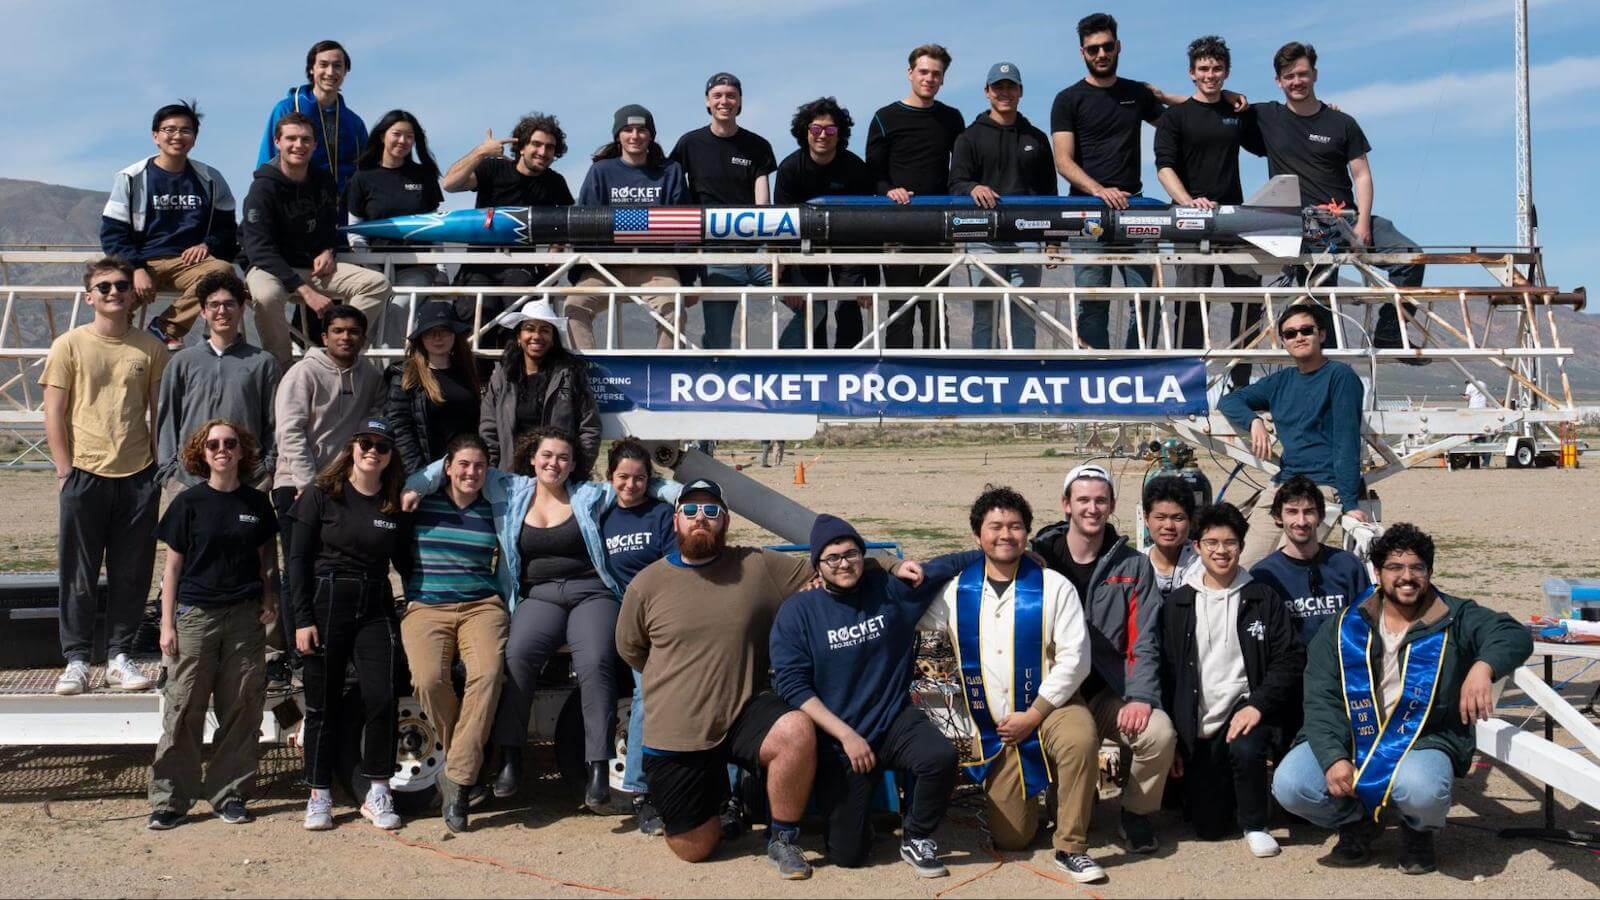 A photo of a group of people in the desert, holding a rocket and standing in front of a sign that says Rocket Project at UCLA